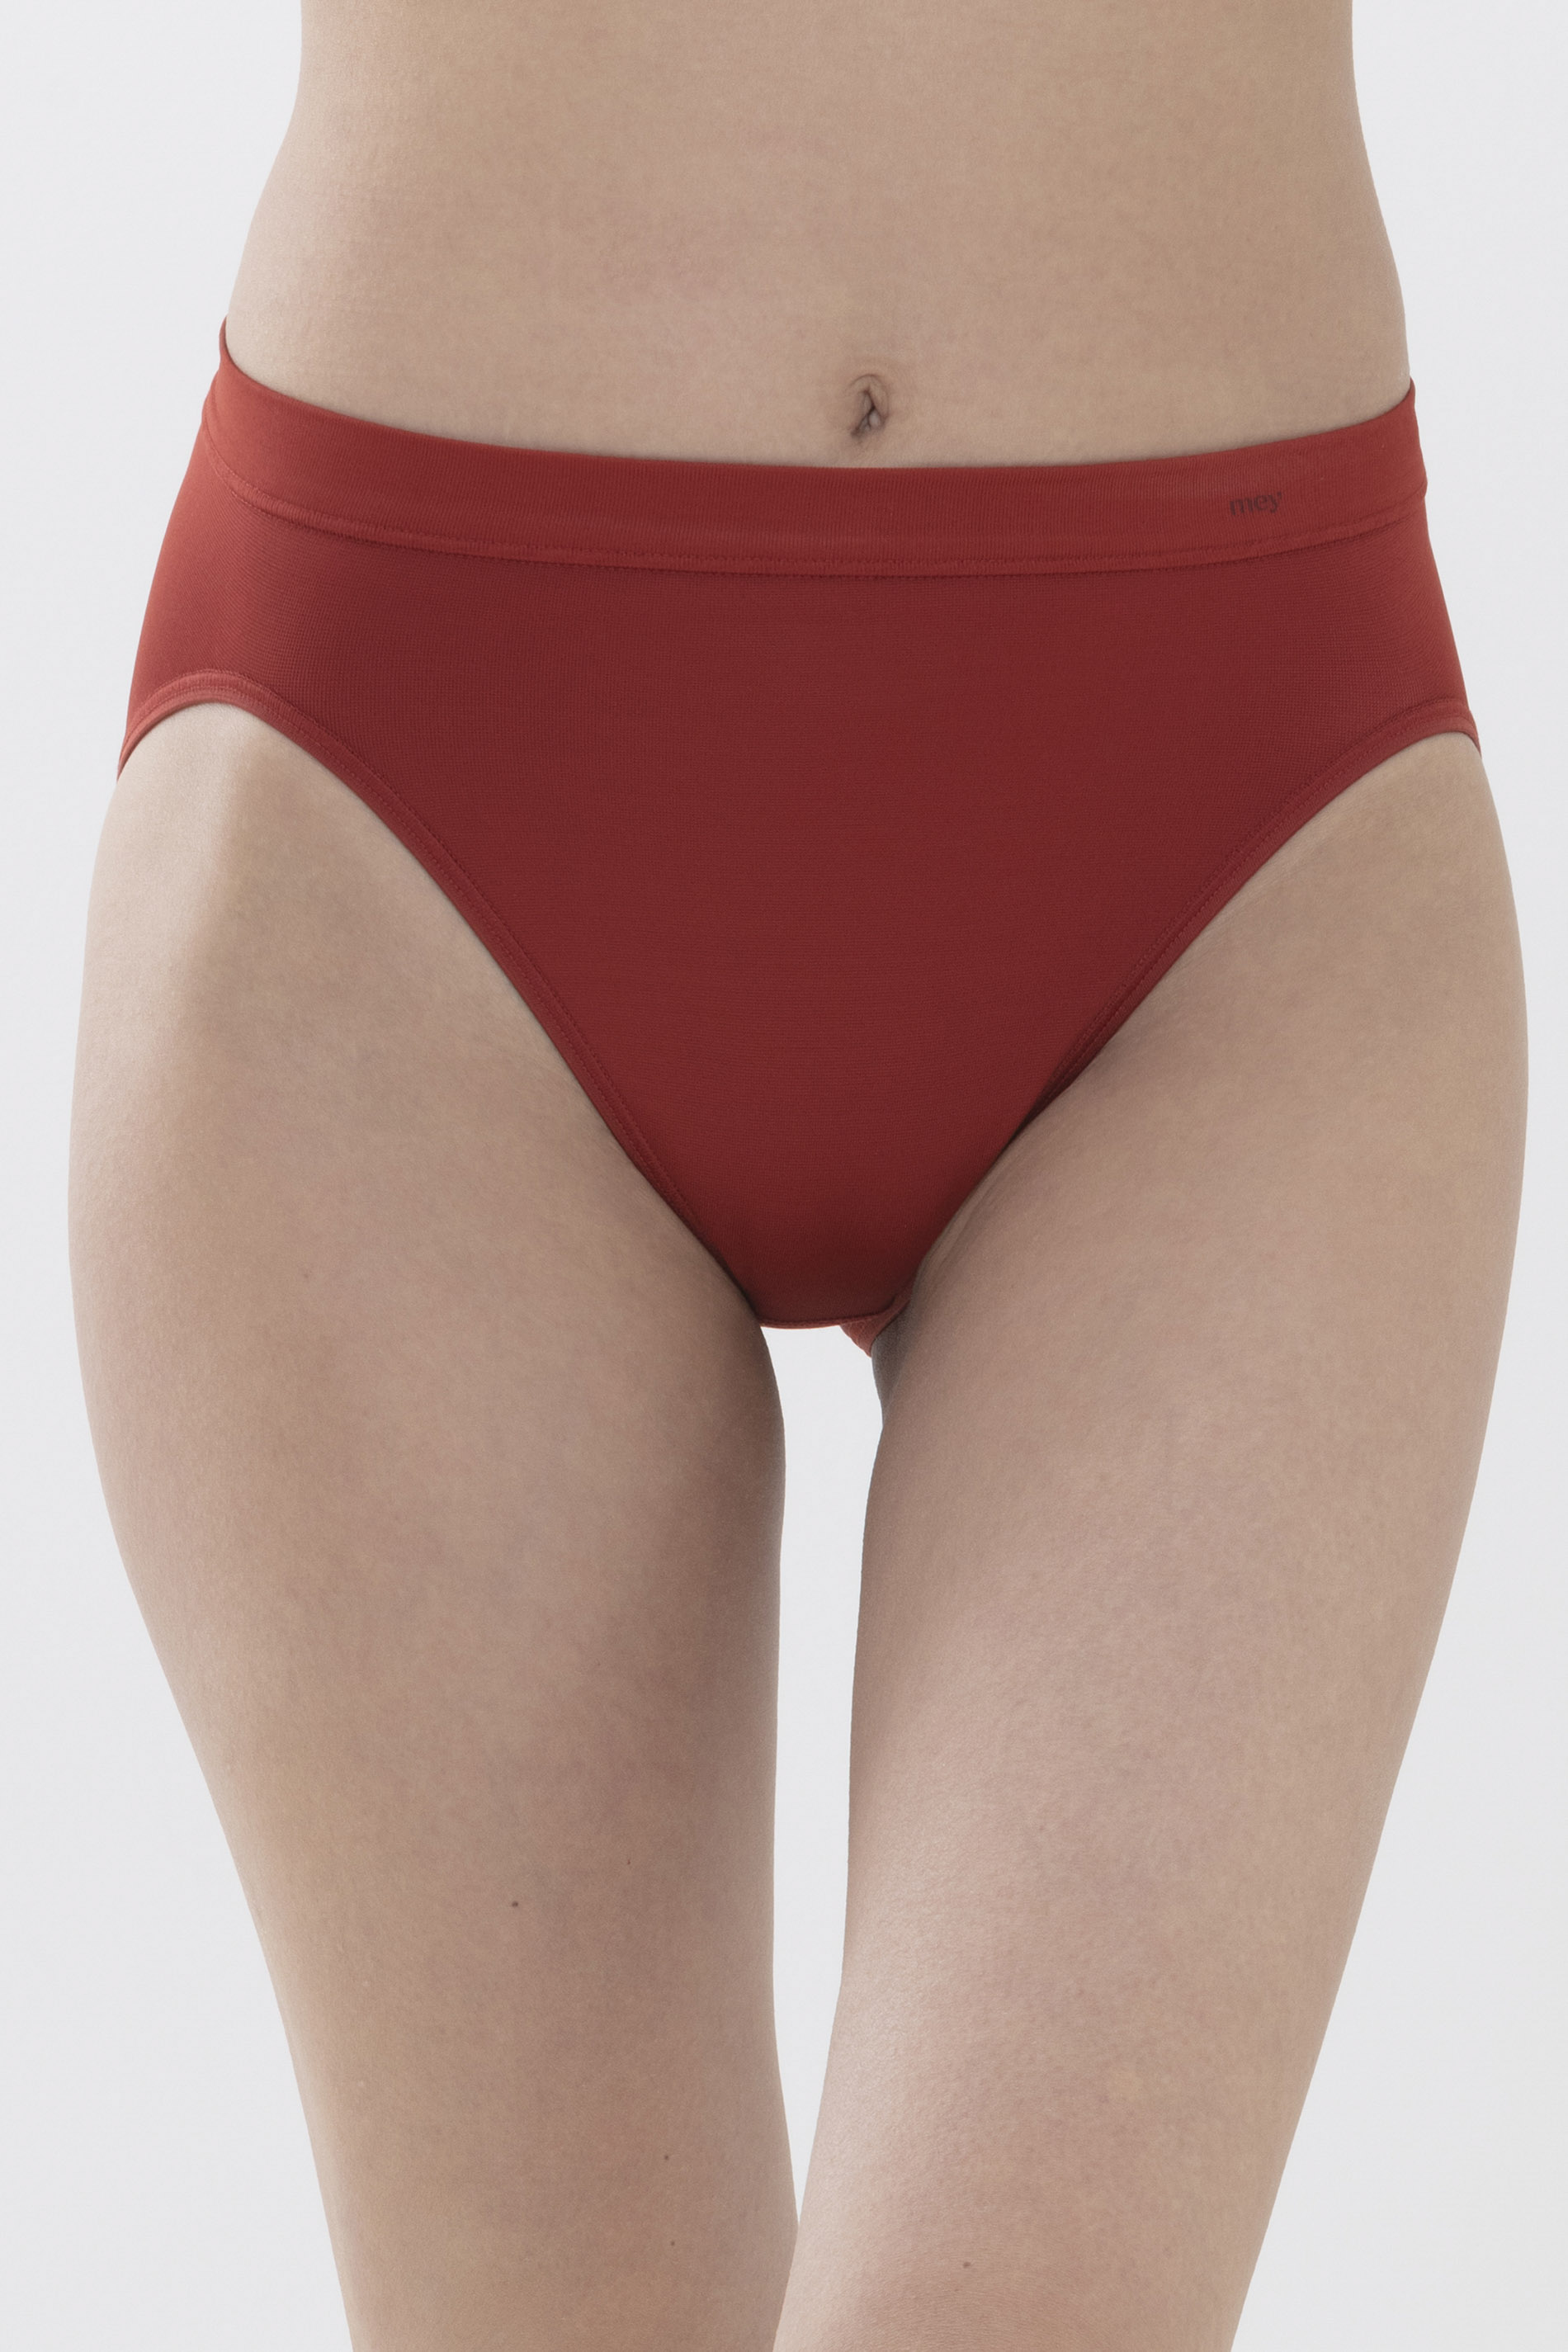 Jazz-Pants Red Pepper Serie Emotion Frontansicht | mey®